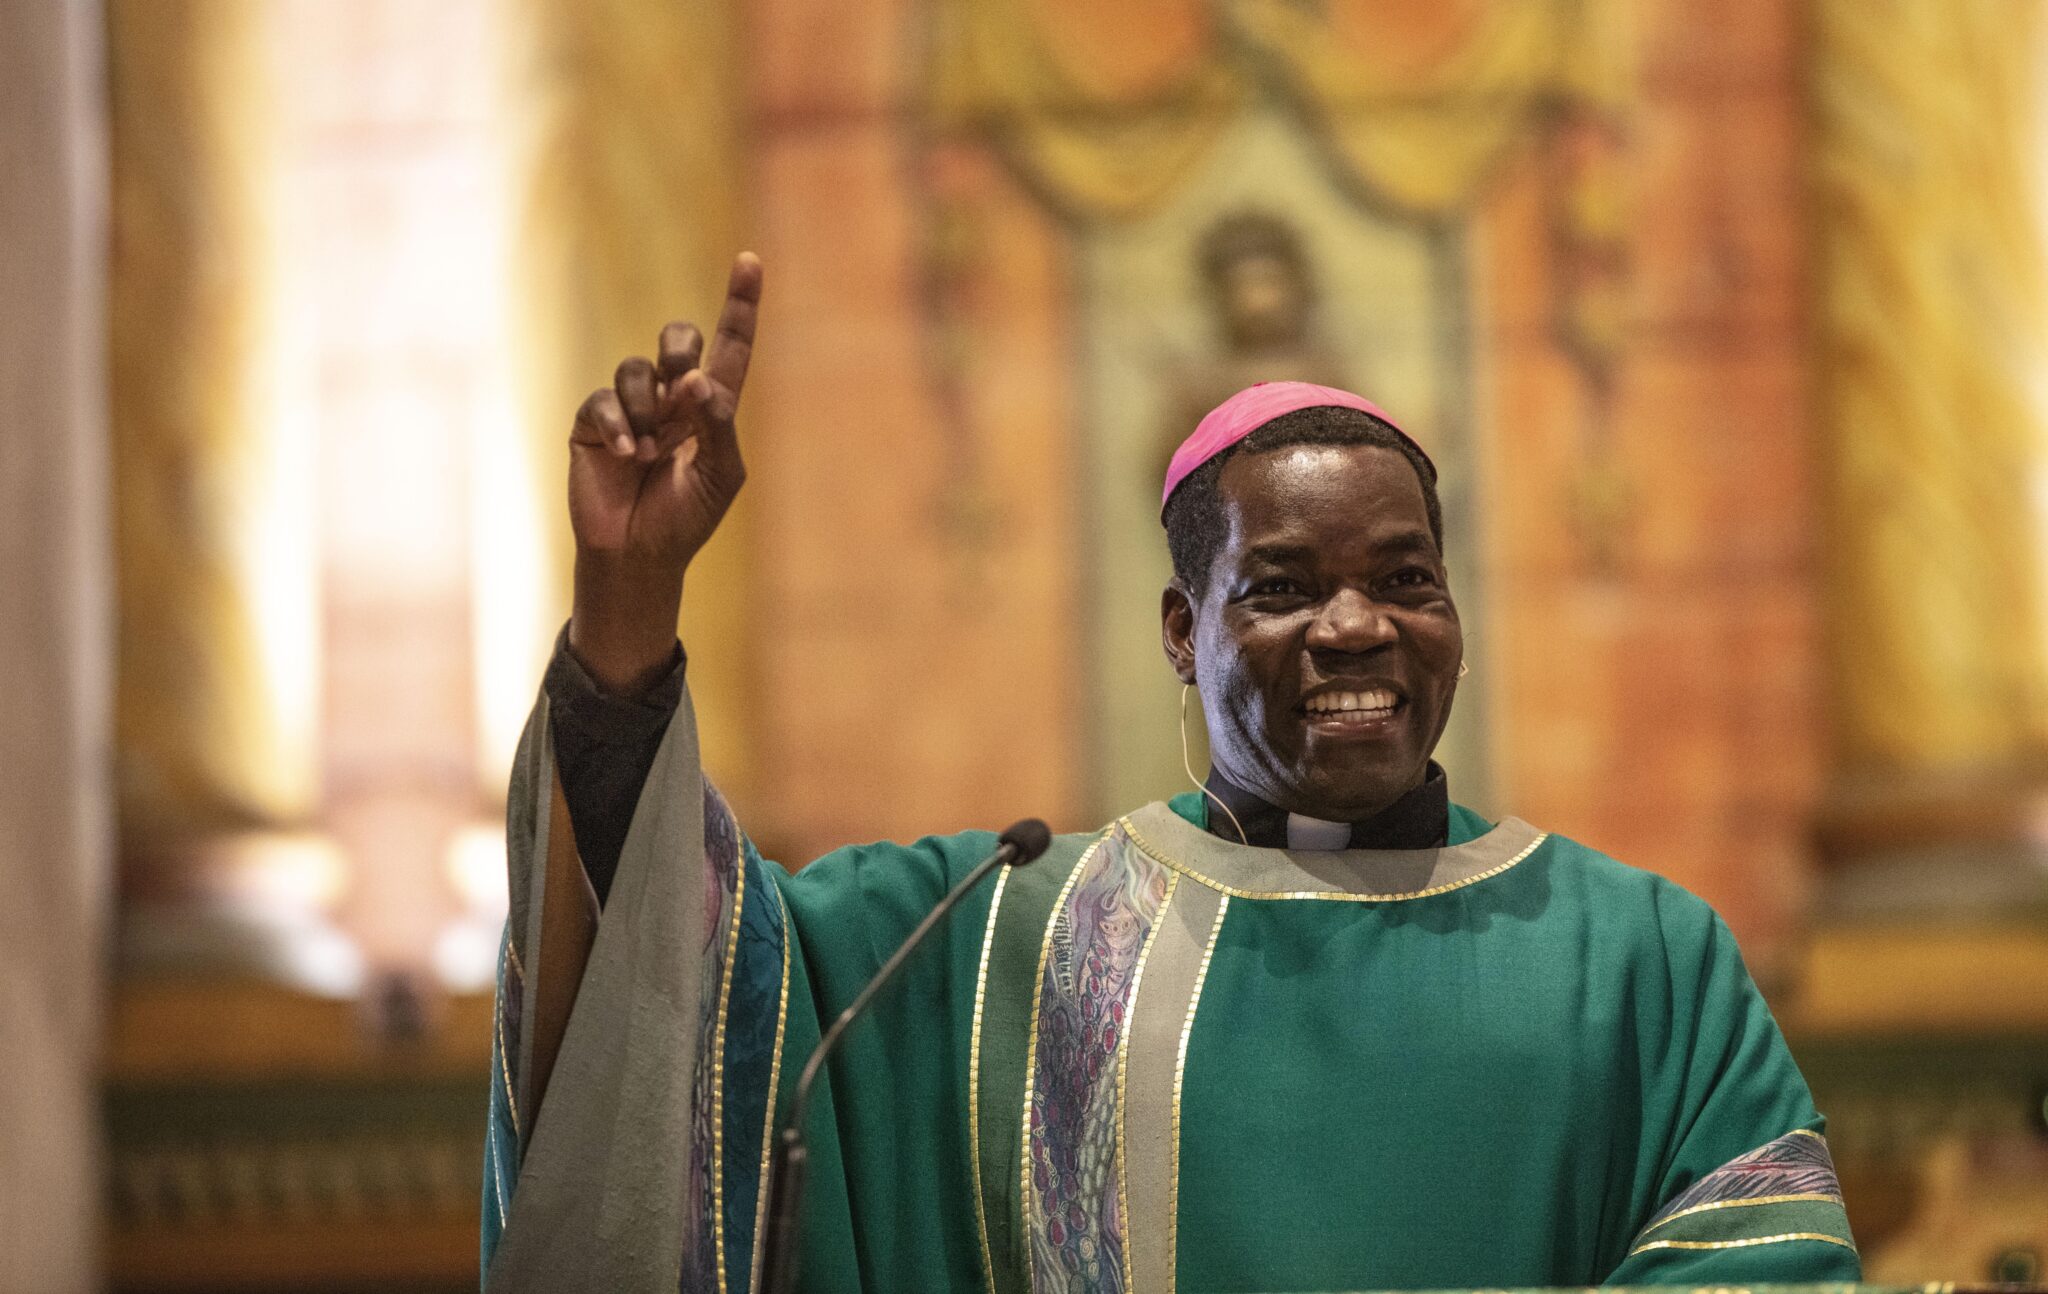 Bishop Eduardo Hiiboro Kussala of Tombura-Yambio, Southern Sudan, delivers the homily during Mass at Old Mission Santa Barbara in California Oct. 13, 2019. Since the May 19, 2024, disappearance of Father Luke Yugue, who ministers in the diocese, and his driver Michael Gbeko, government authorities have not given concrete information about the condition of the men, according to Bishop Kussala. (OSV News photo/Octavio Duran)